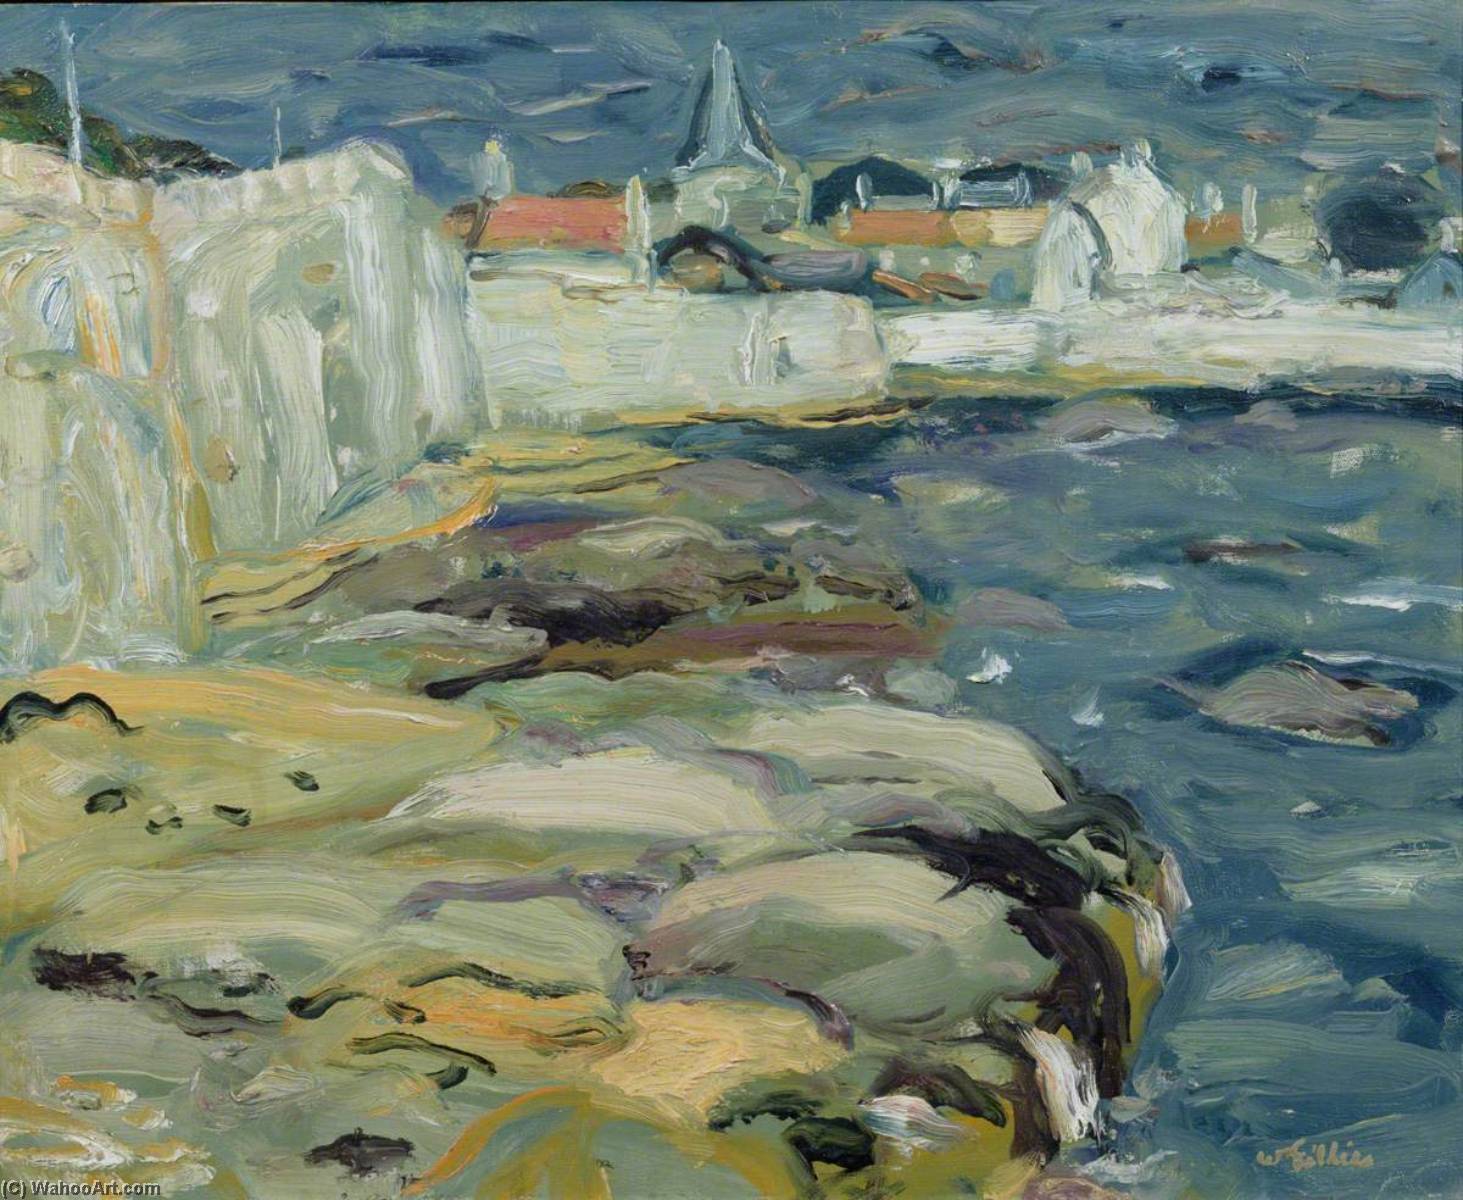 Anstruther by William George Gillies William George Gillies | ArtsDot.com